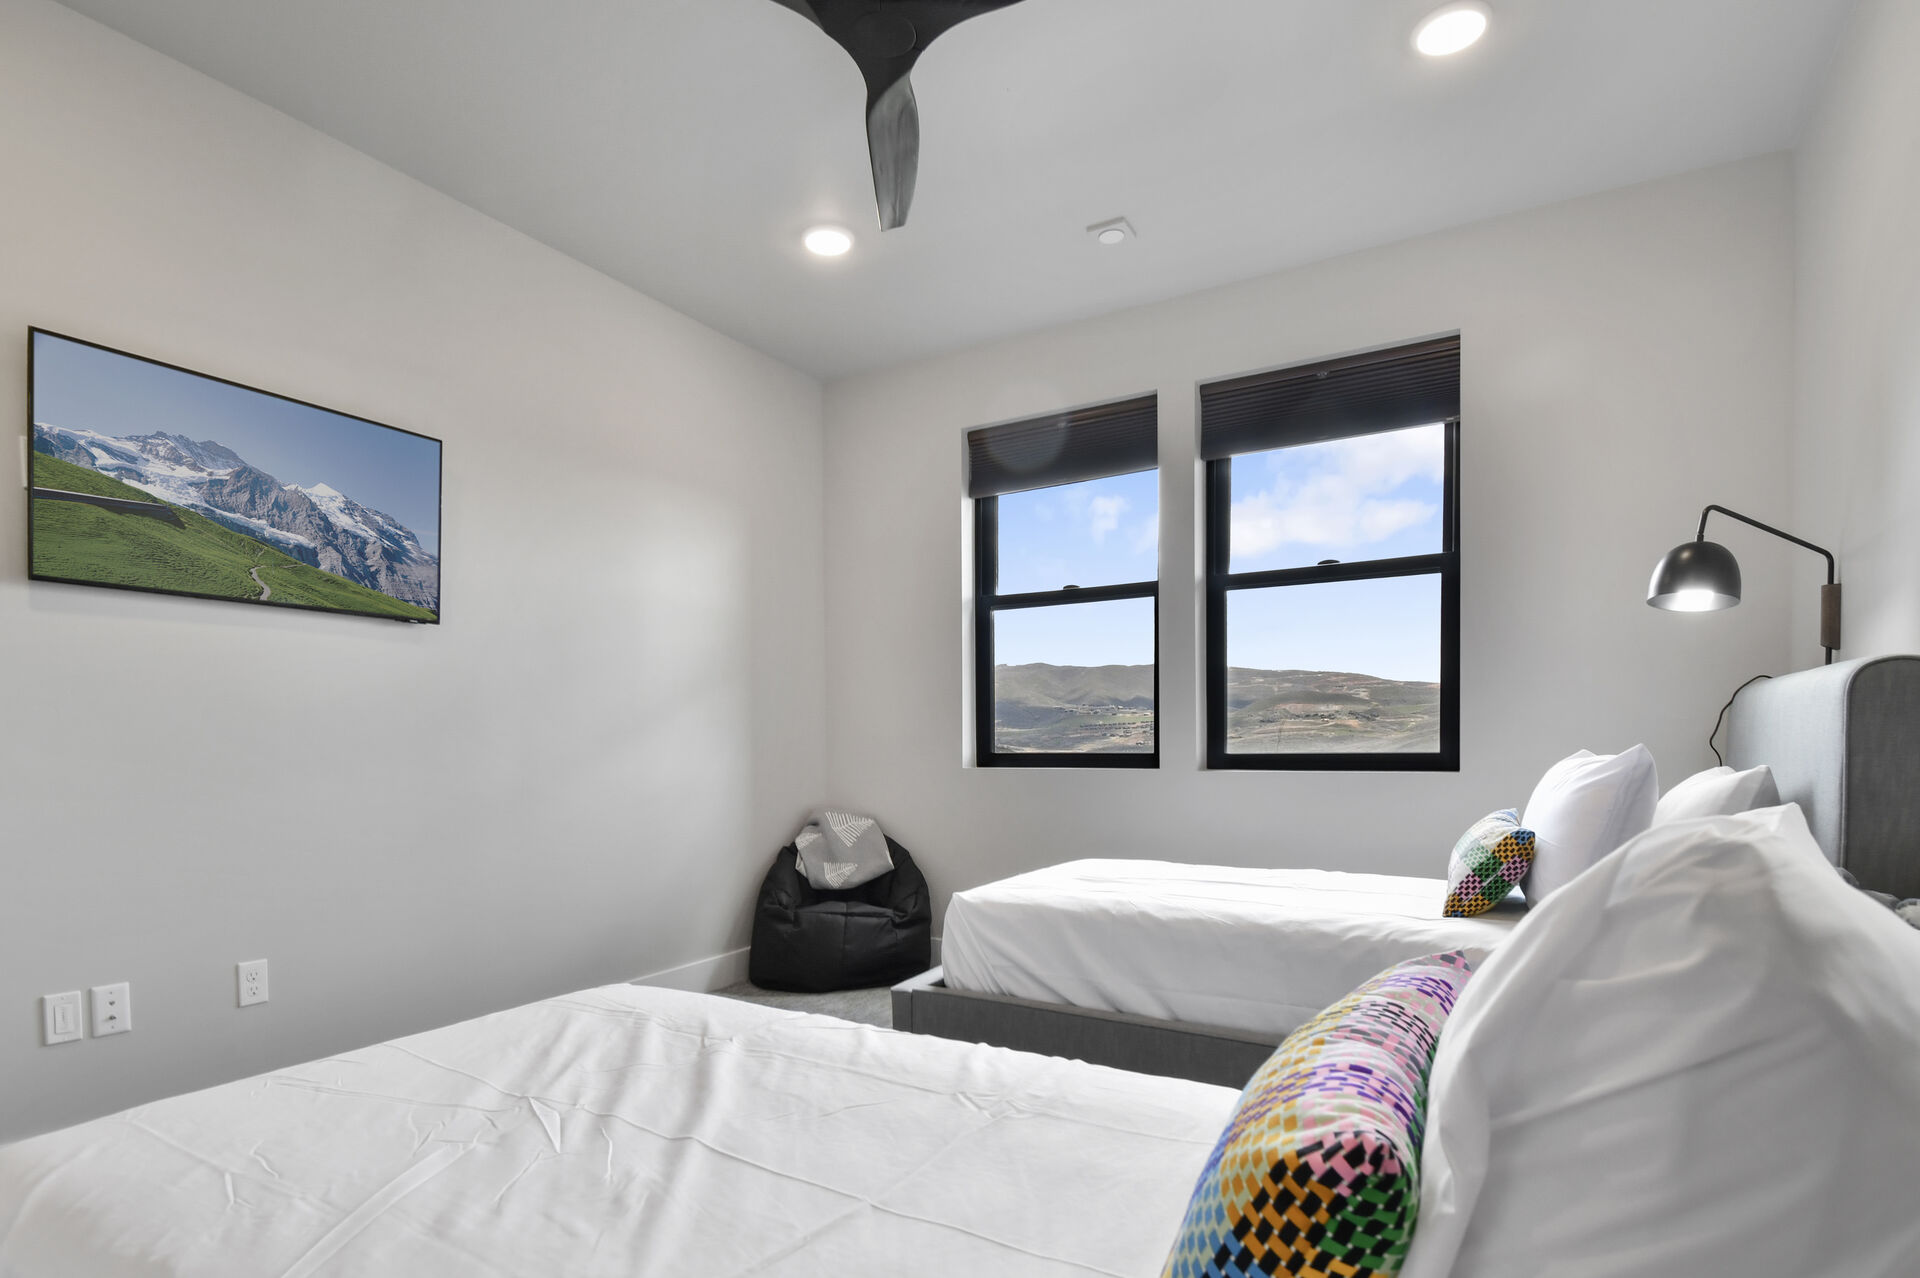 Guest bedroom with dual beds has HDTV with Smart Channels